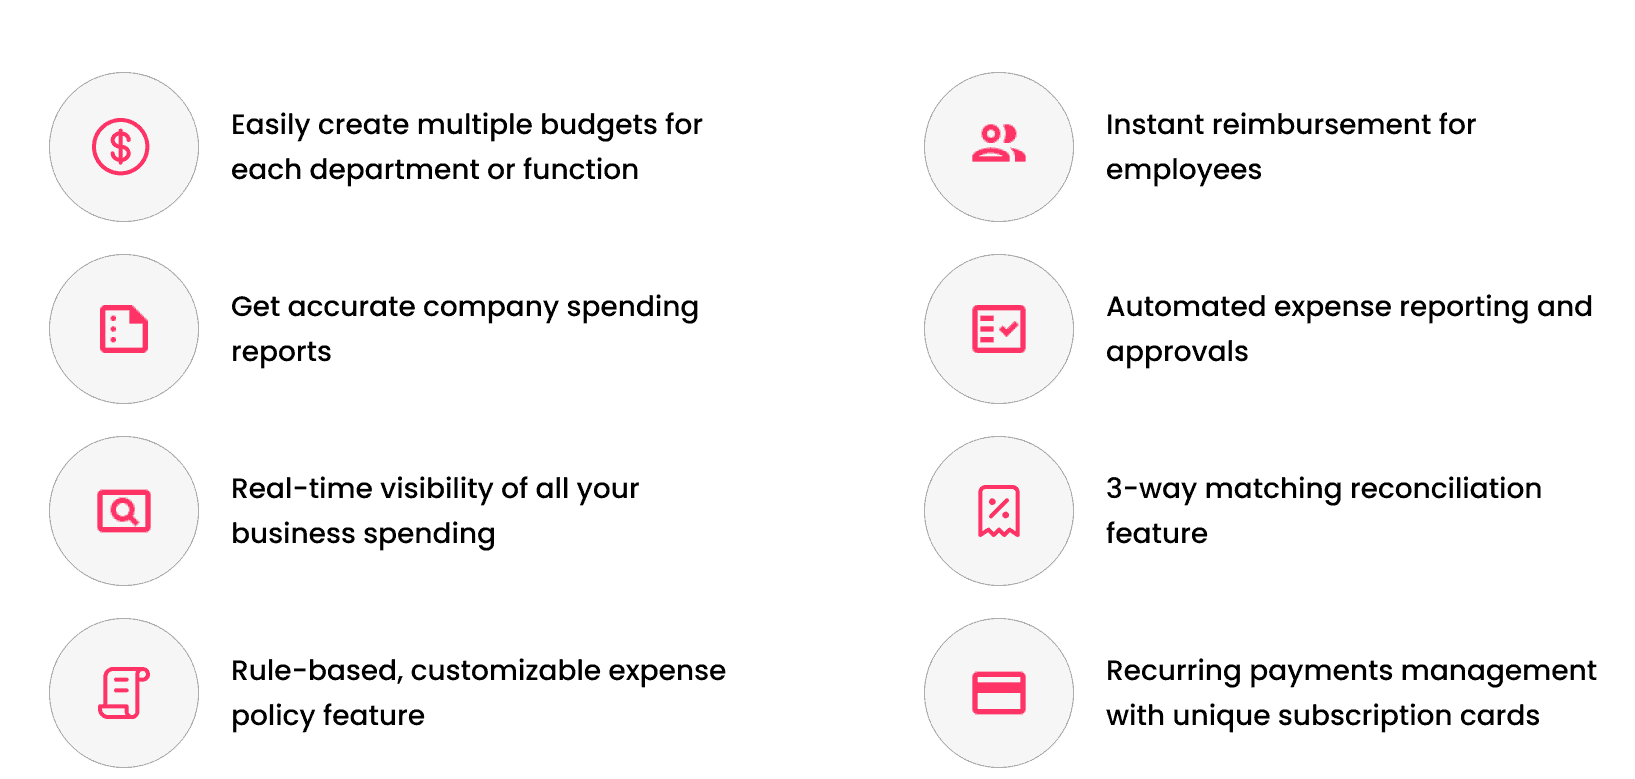 Why choose Volopay expense management software?